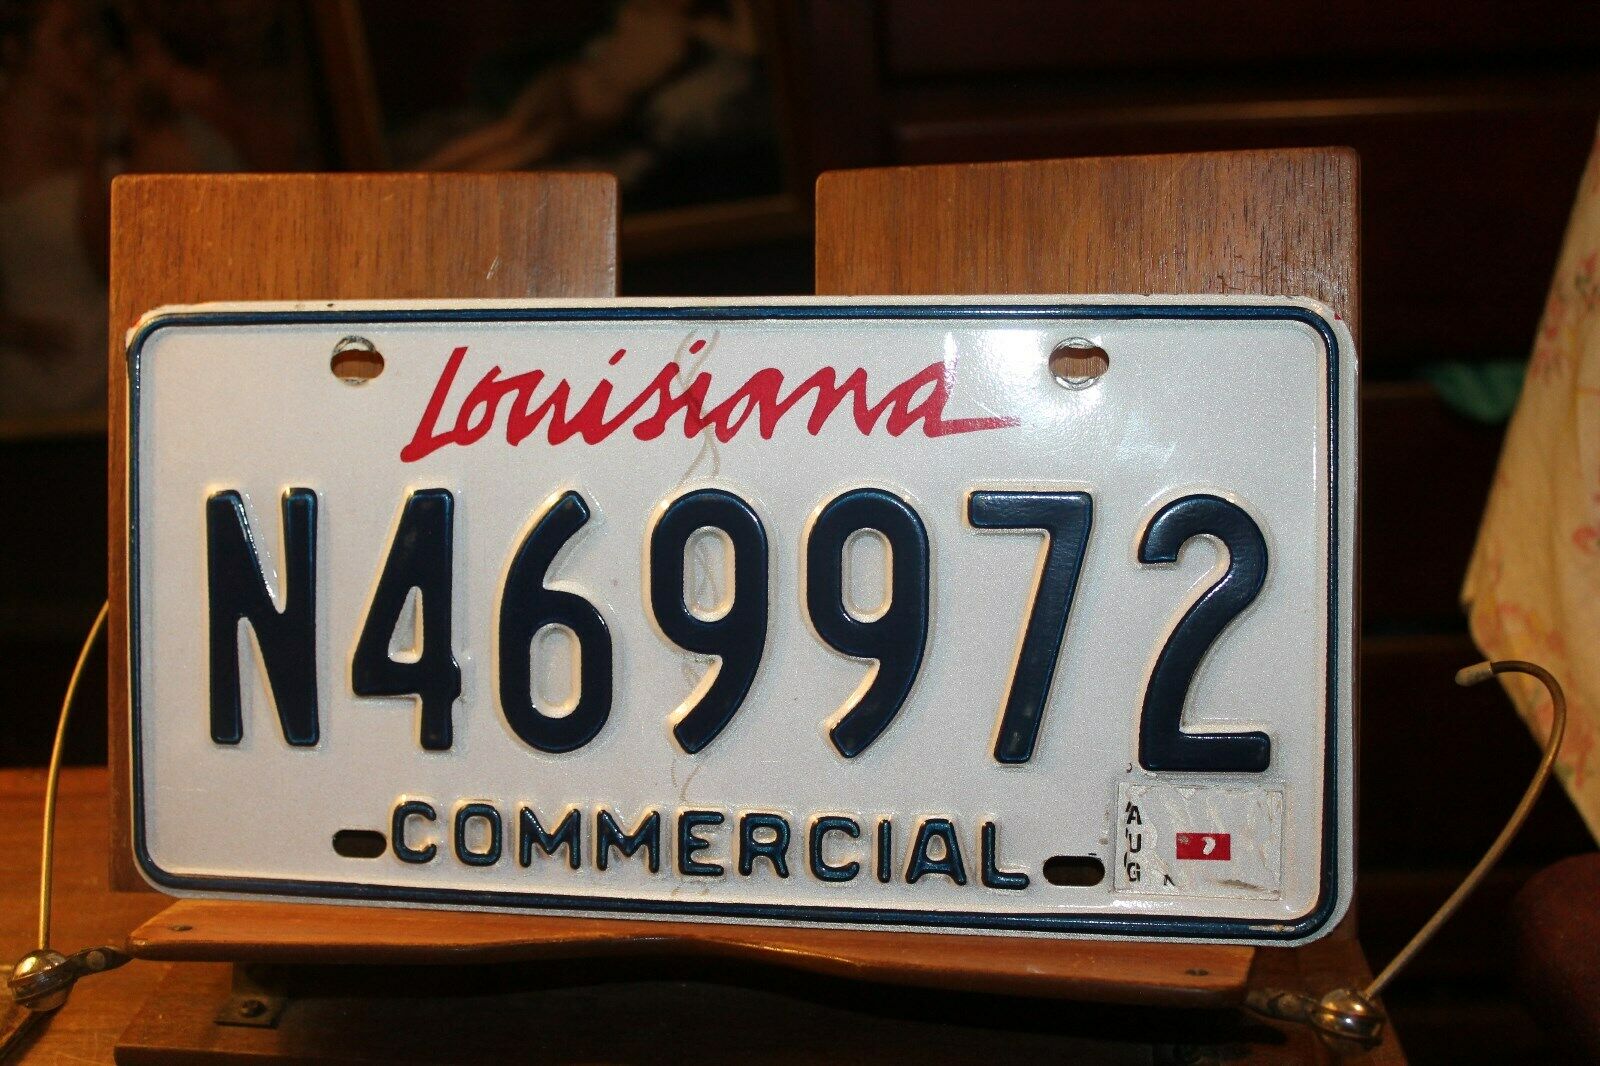 2011 License Plate Louisiana Commercial N469972